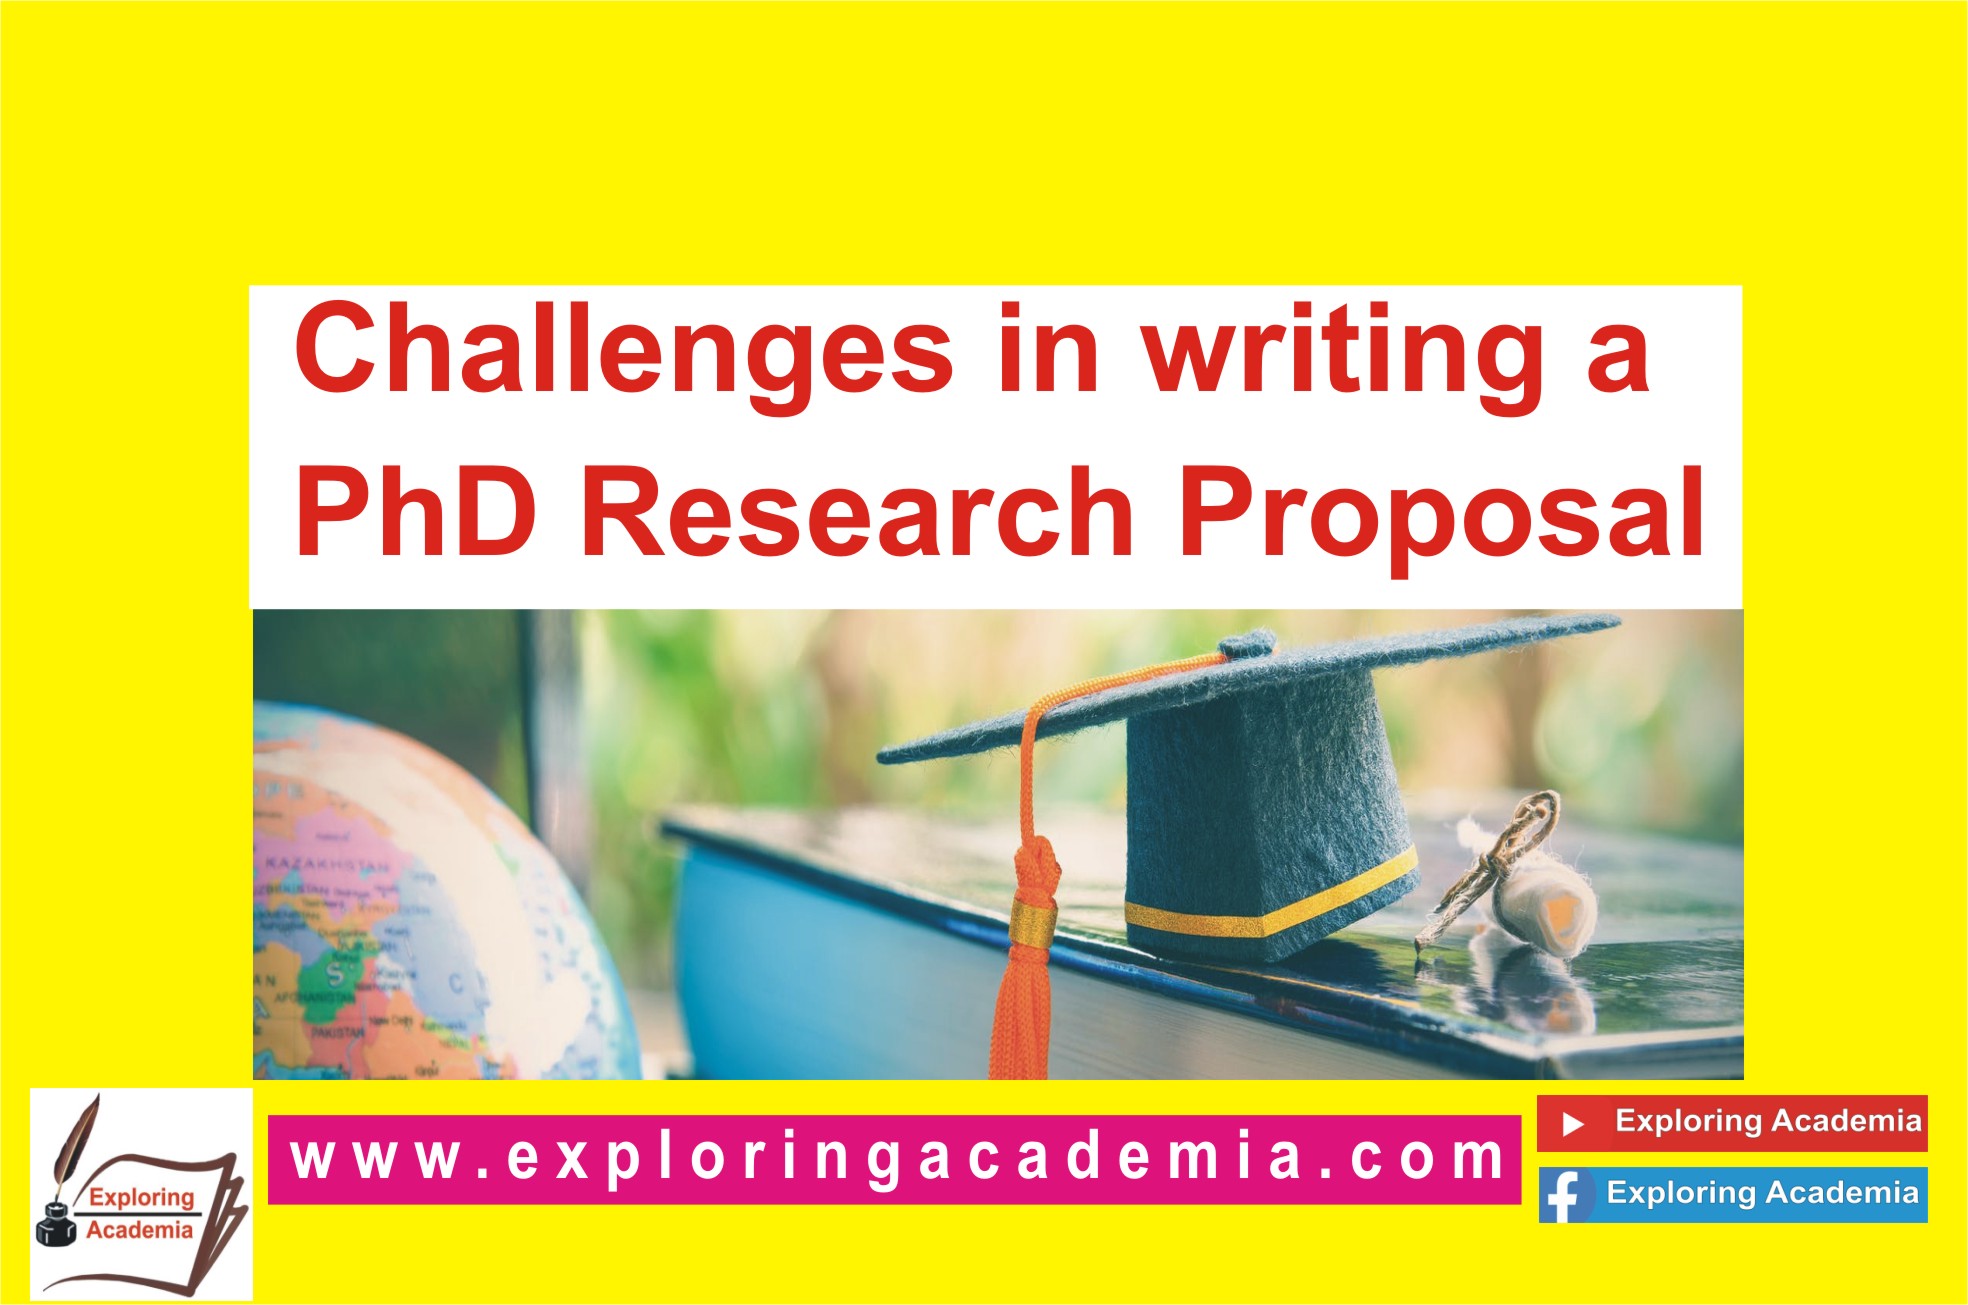 Challenges in writing a PhD research proposal